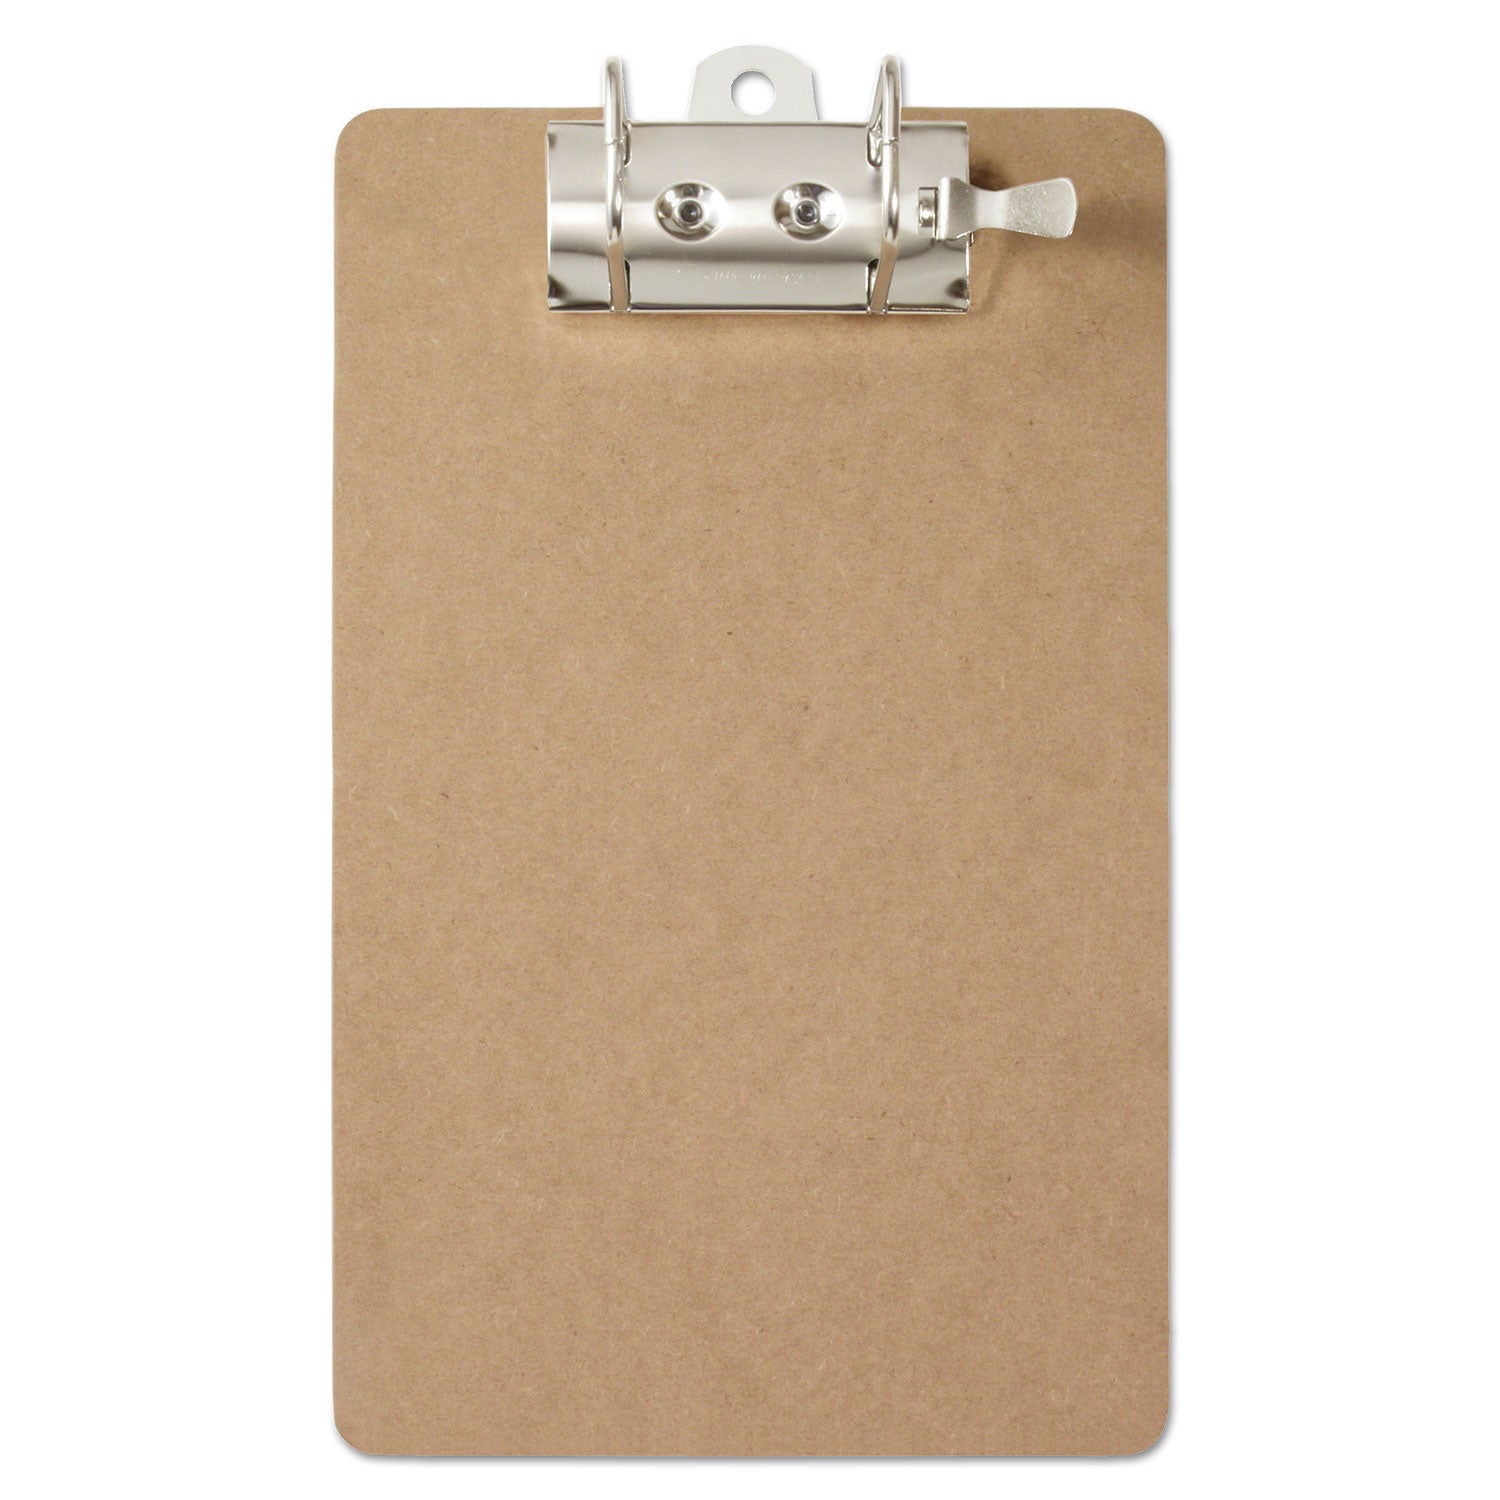 Recycled Hardboard Archboard Clipboard, 2.5" Clip Capacity, Holds 8.5 x 11 Sheets, Brown - 